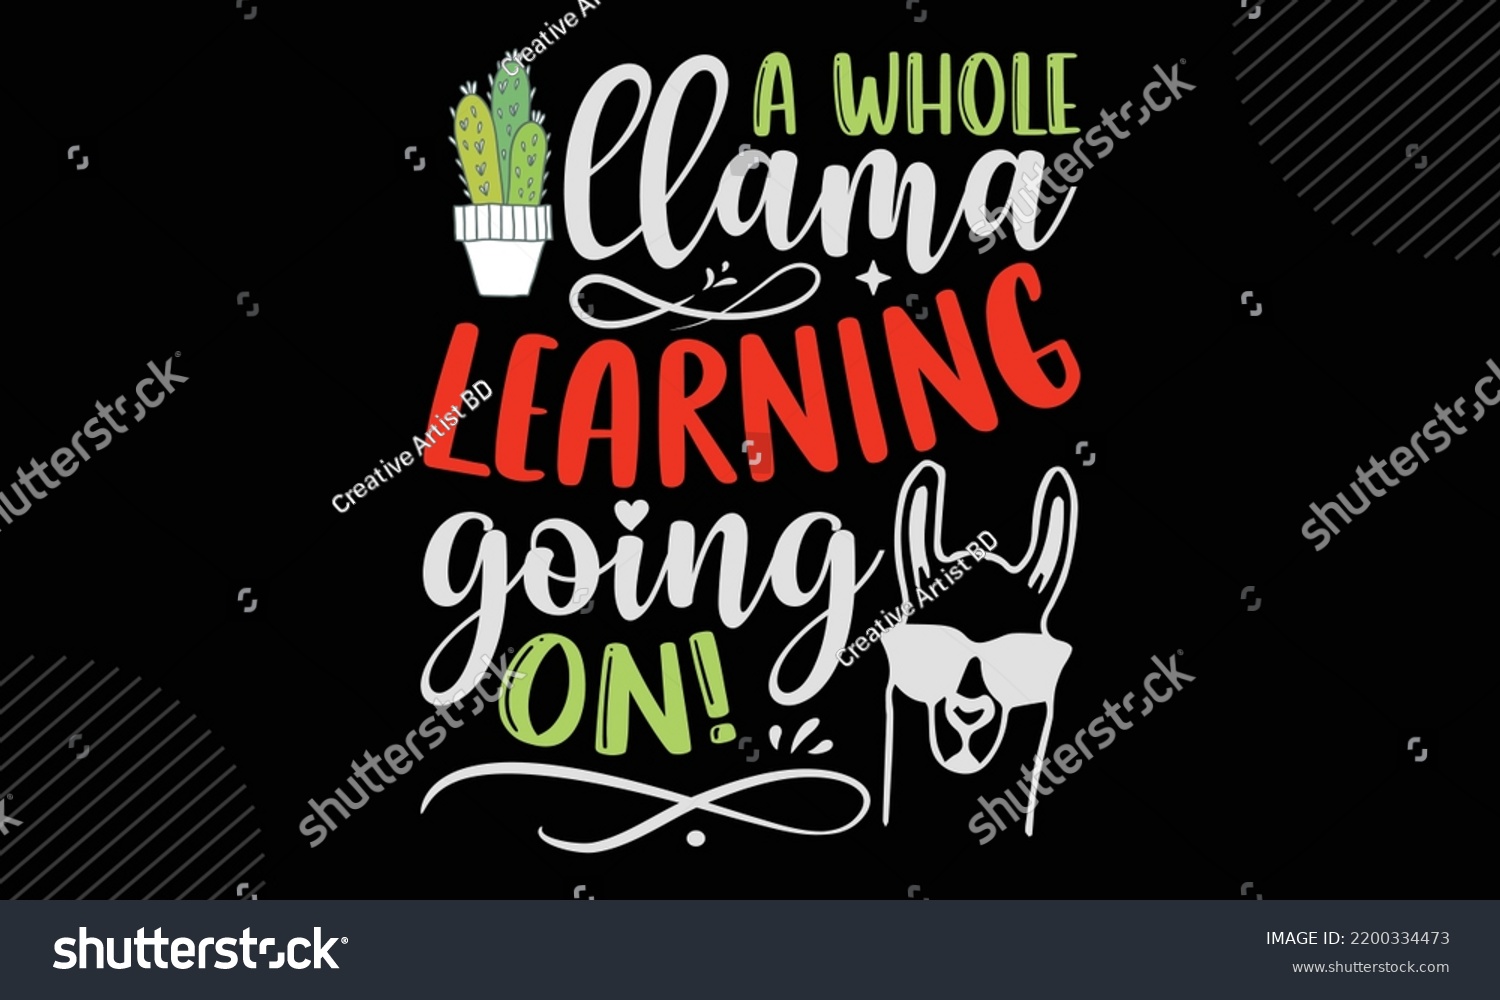 SVG of A Whole Llama Learning Going On! 
- Llama T shirt Design, Modern calligraphy, Cut Files for Cricut Svg, Illustration for prints on bags, posters
 svg